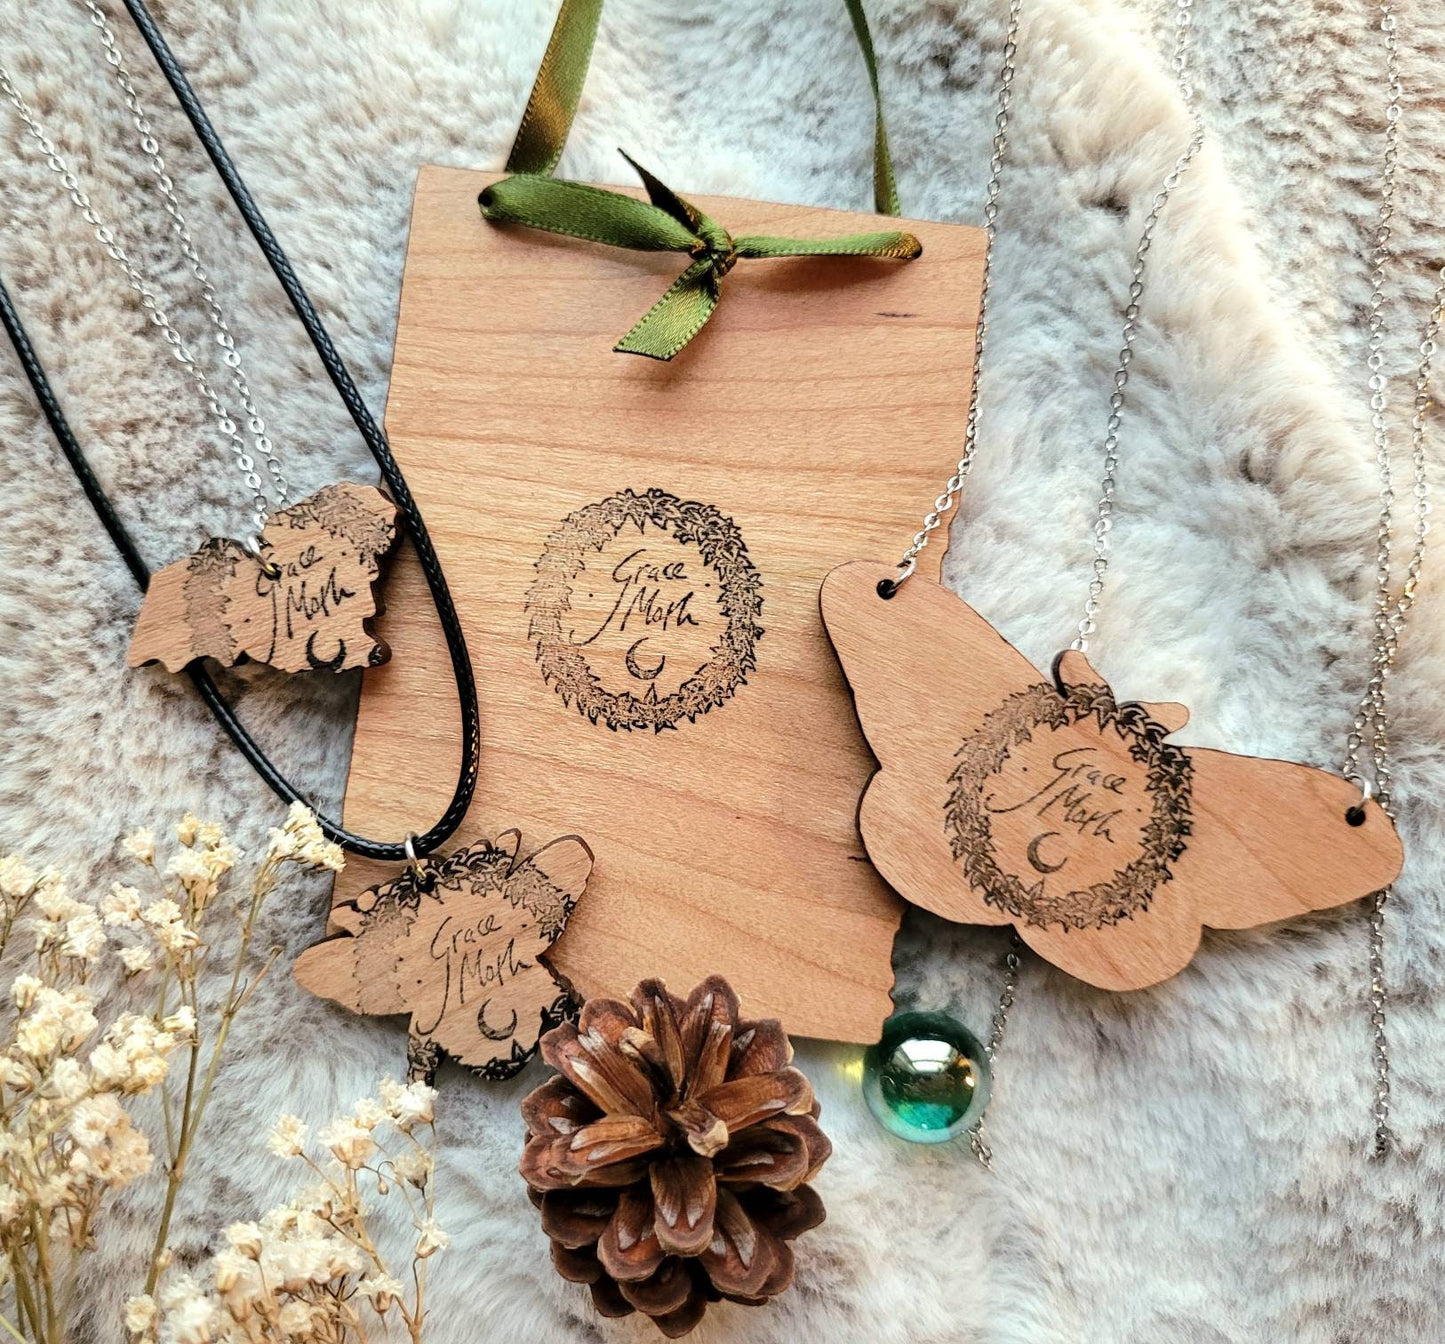 Luna Moth illustrated necklace, responsibly sourced cherry wood, chain options available, by Grace Moth